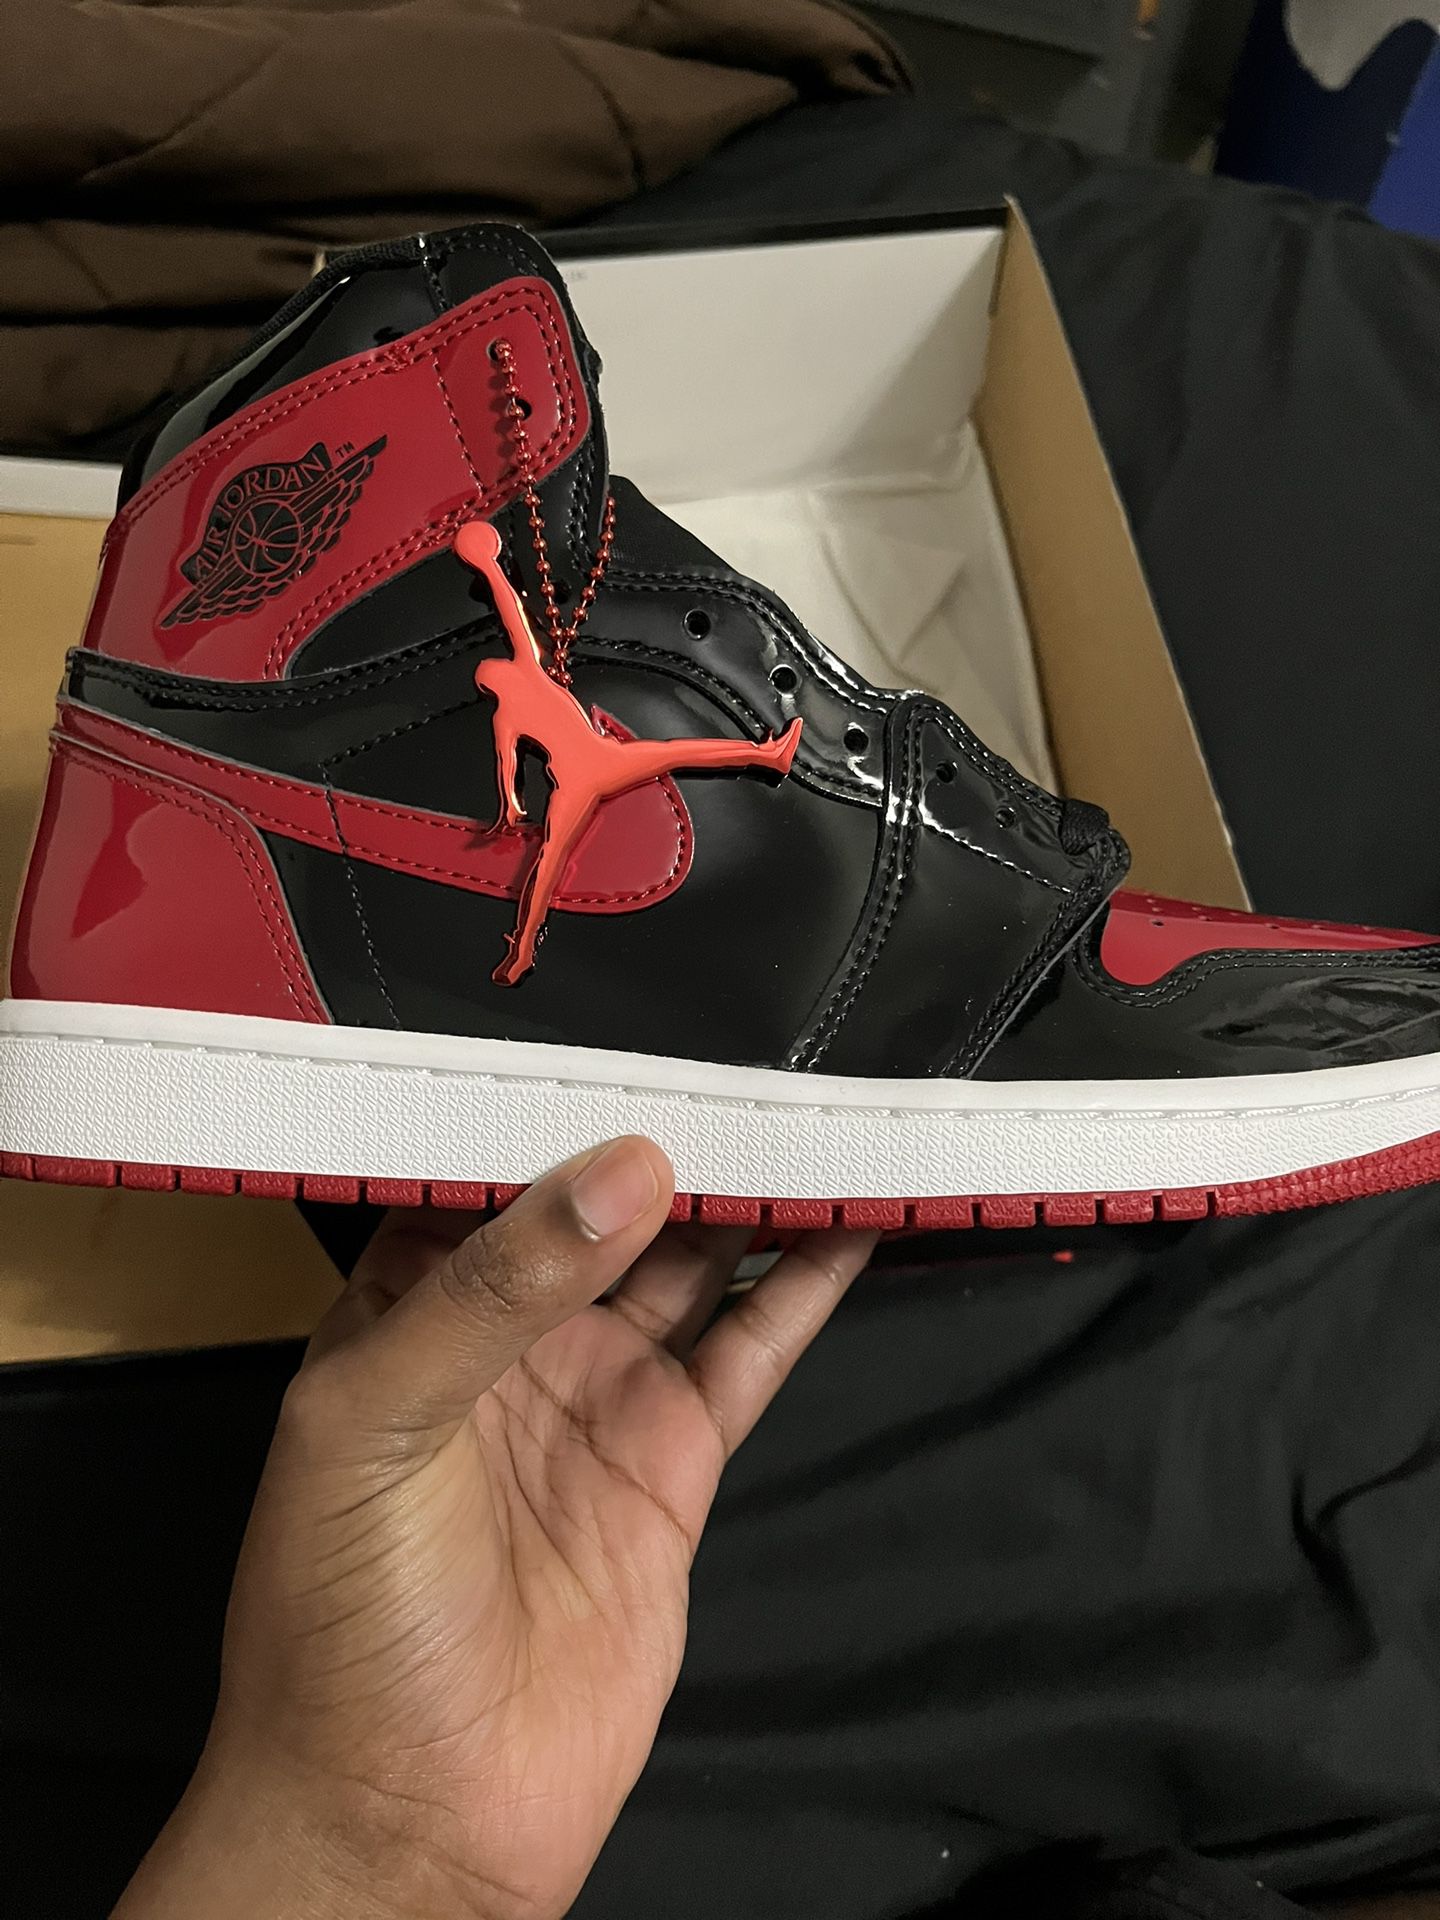 Patent Bred 1,s  Size 8.5, Never Worn 